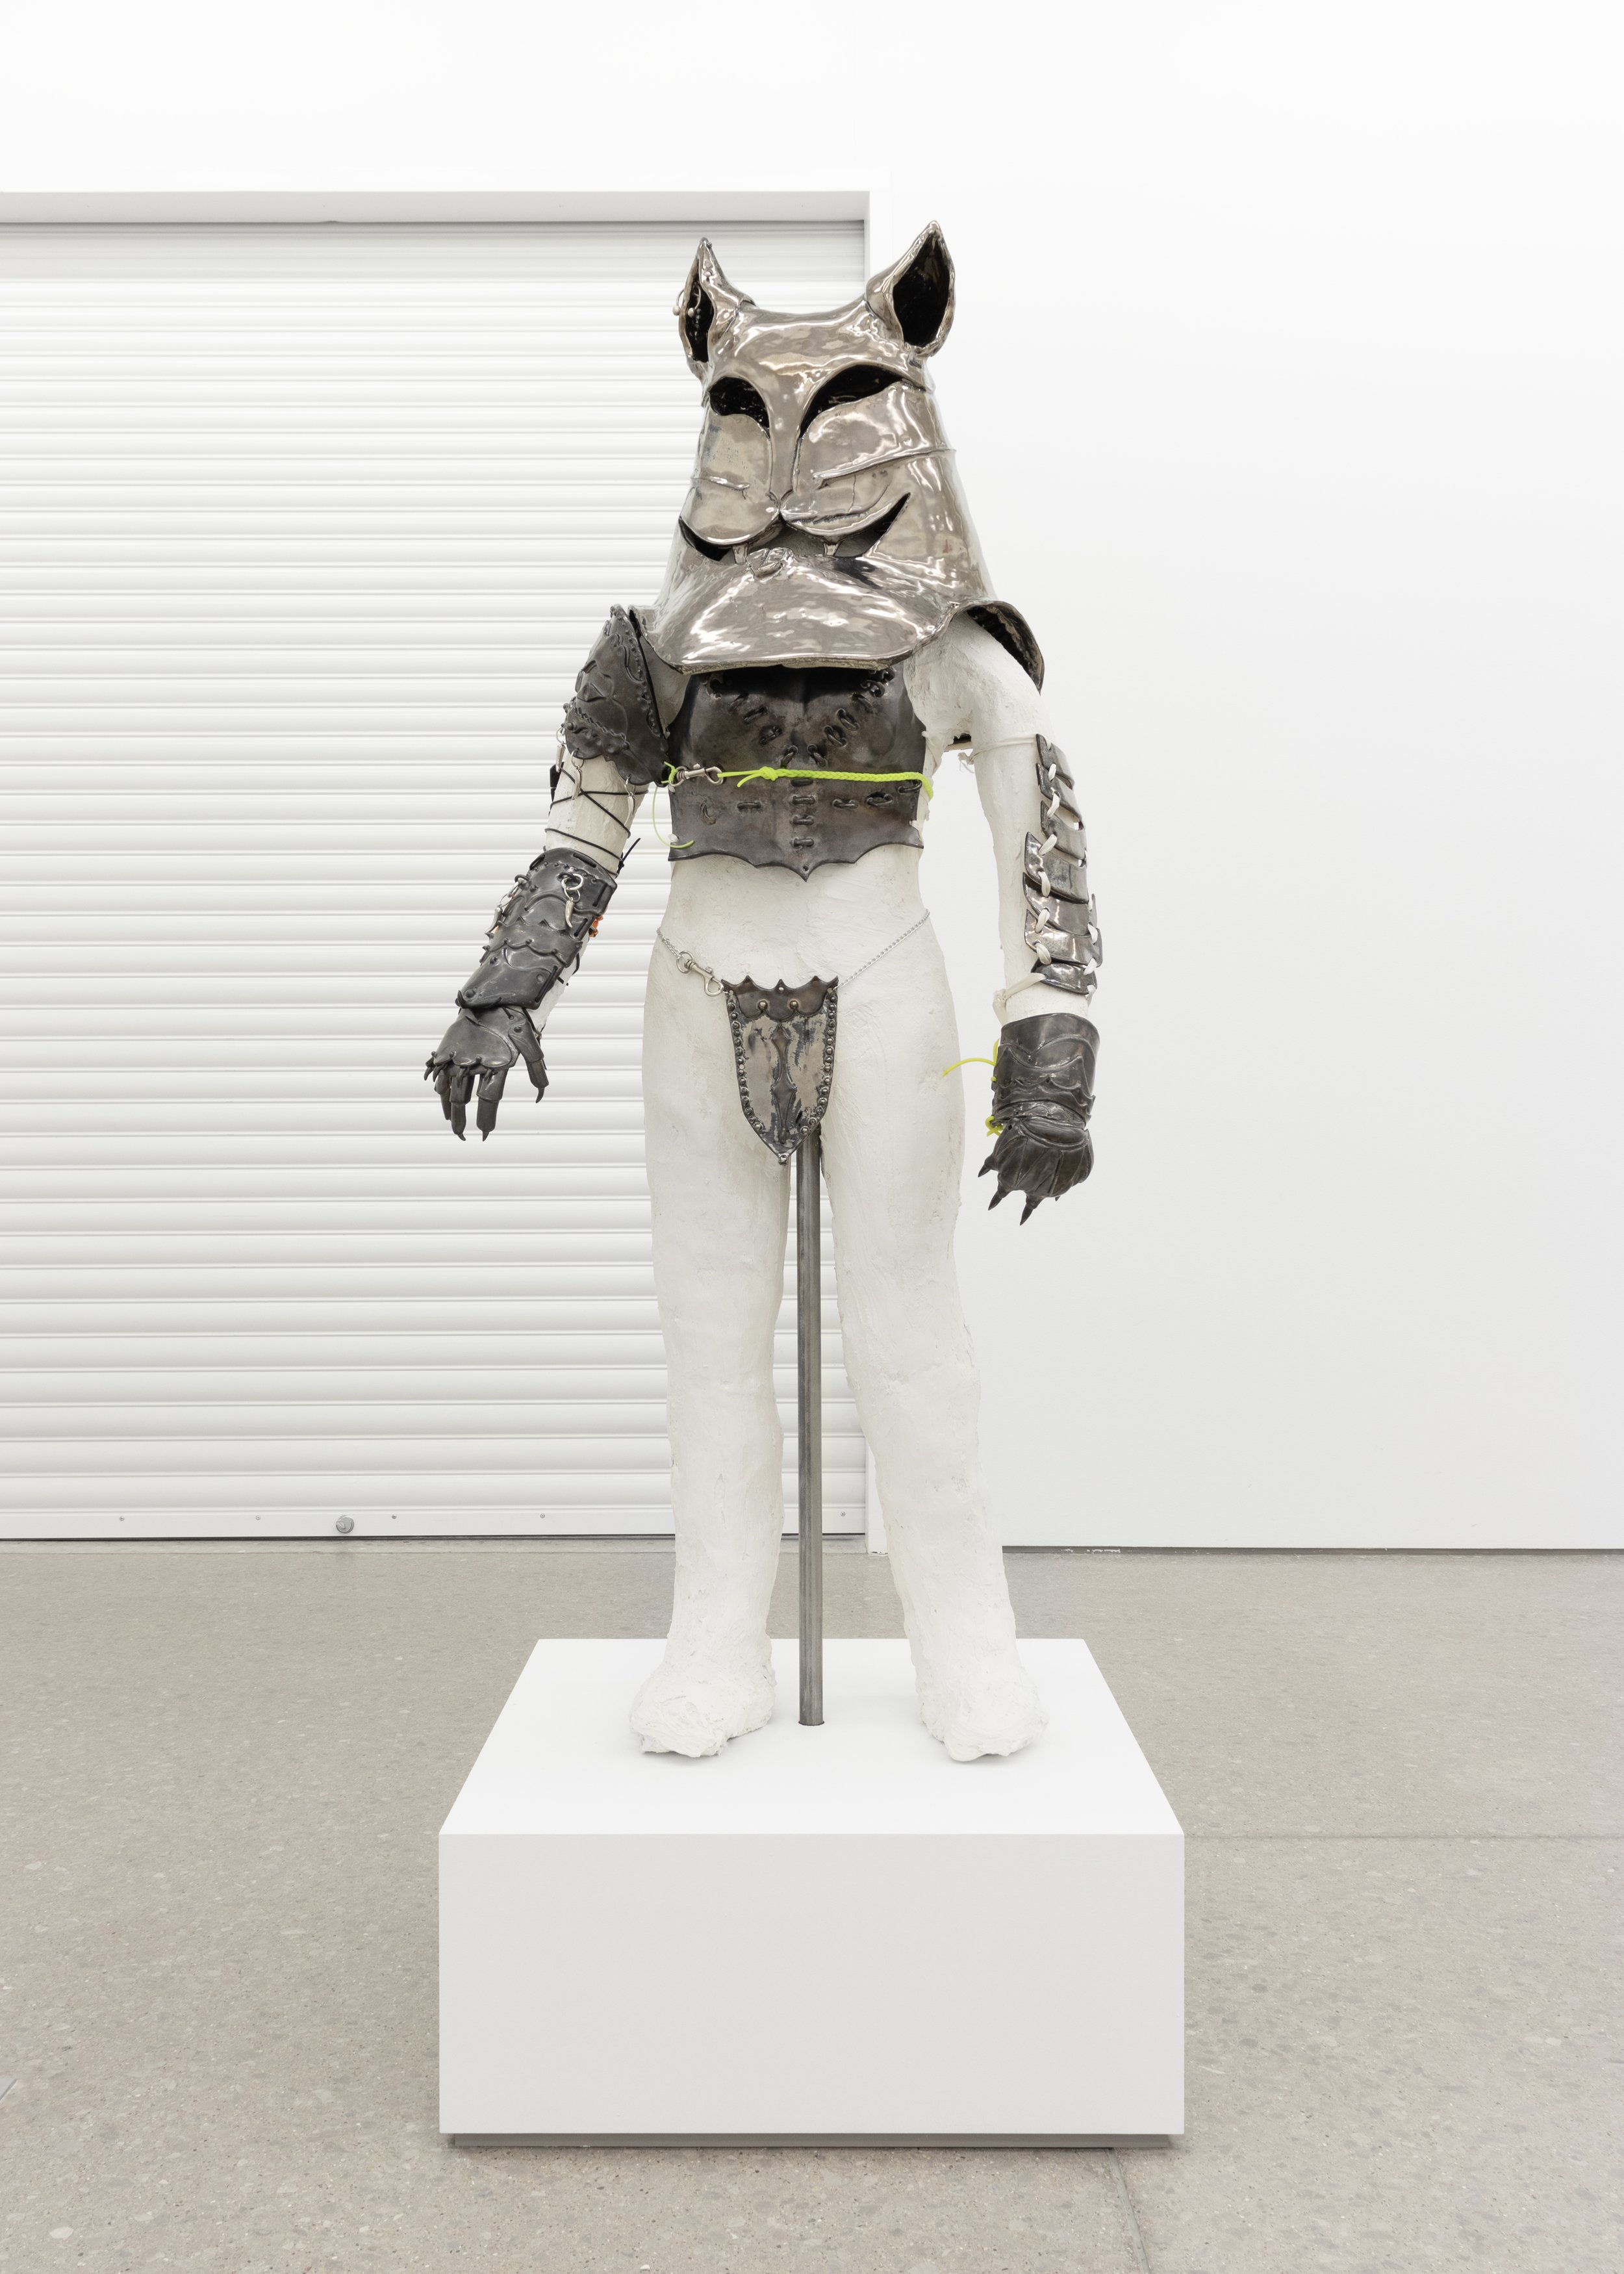  Chloe Seibert  Catsuit 1, 2023  glazed stoneware, plaster, wire, satin ribbon, rubber cord, sterling and stainless steel jewelry  46h x 29w x 17d in   